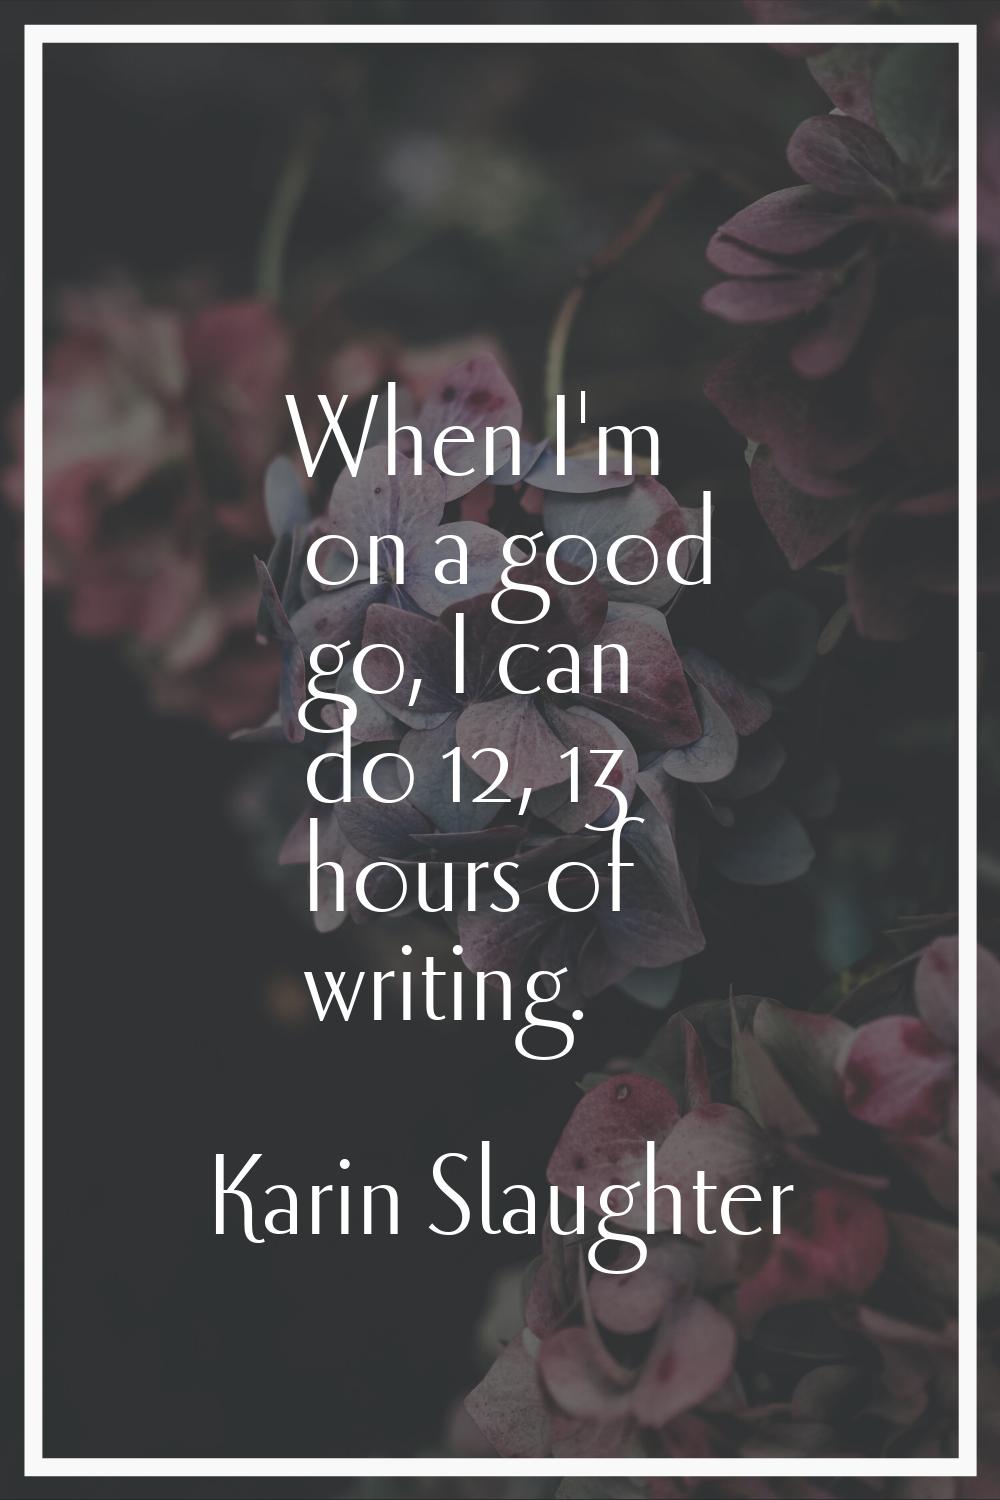 When I'm on a good go, I can do 12, 13 hours of writing.